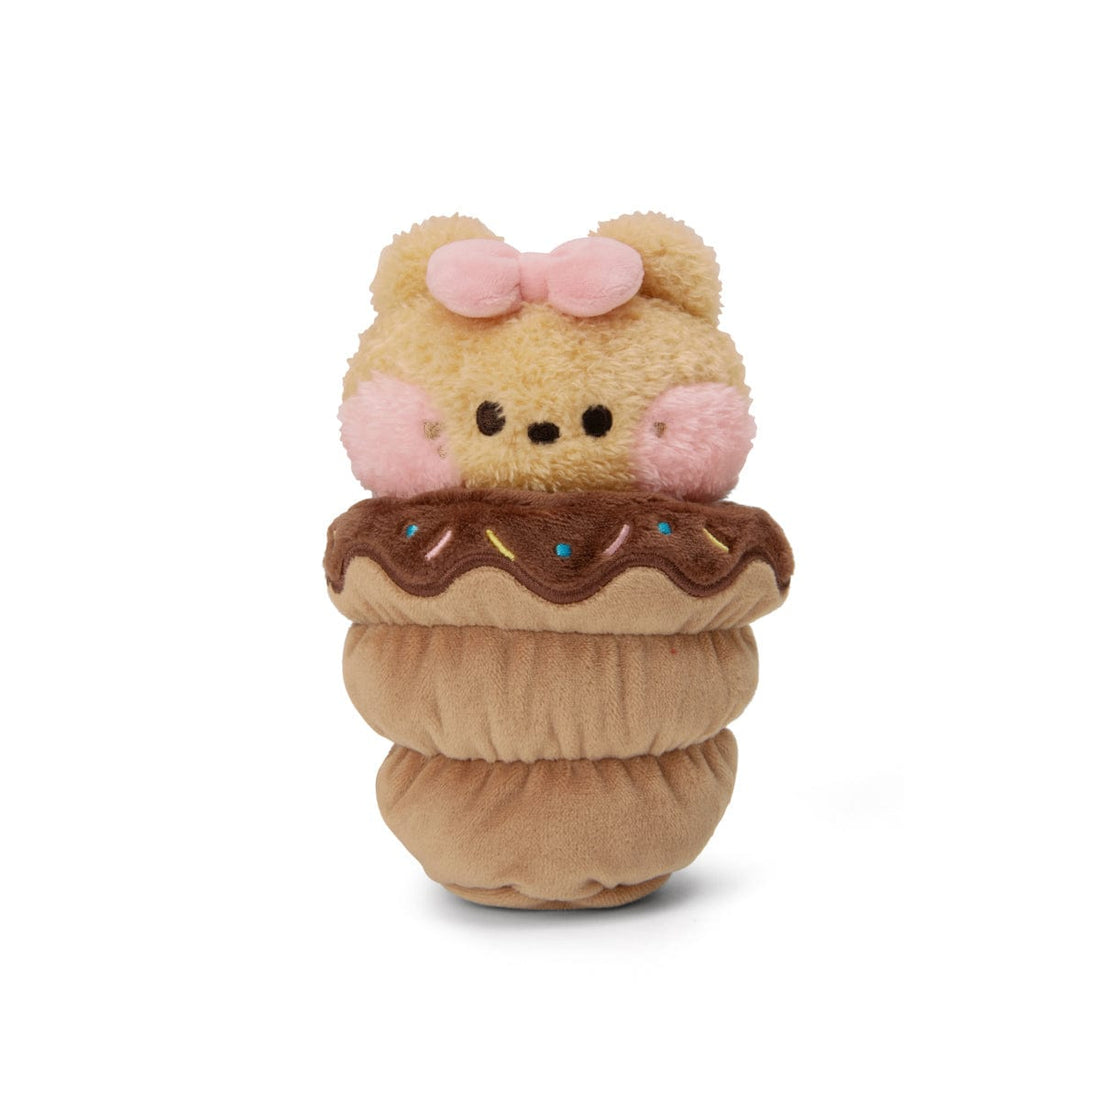 LINE FRIENDS chonini BAKERY STANDING DOLL – LINE FRIENDS COLLECTION STORE